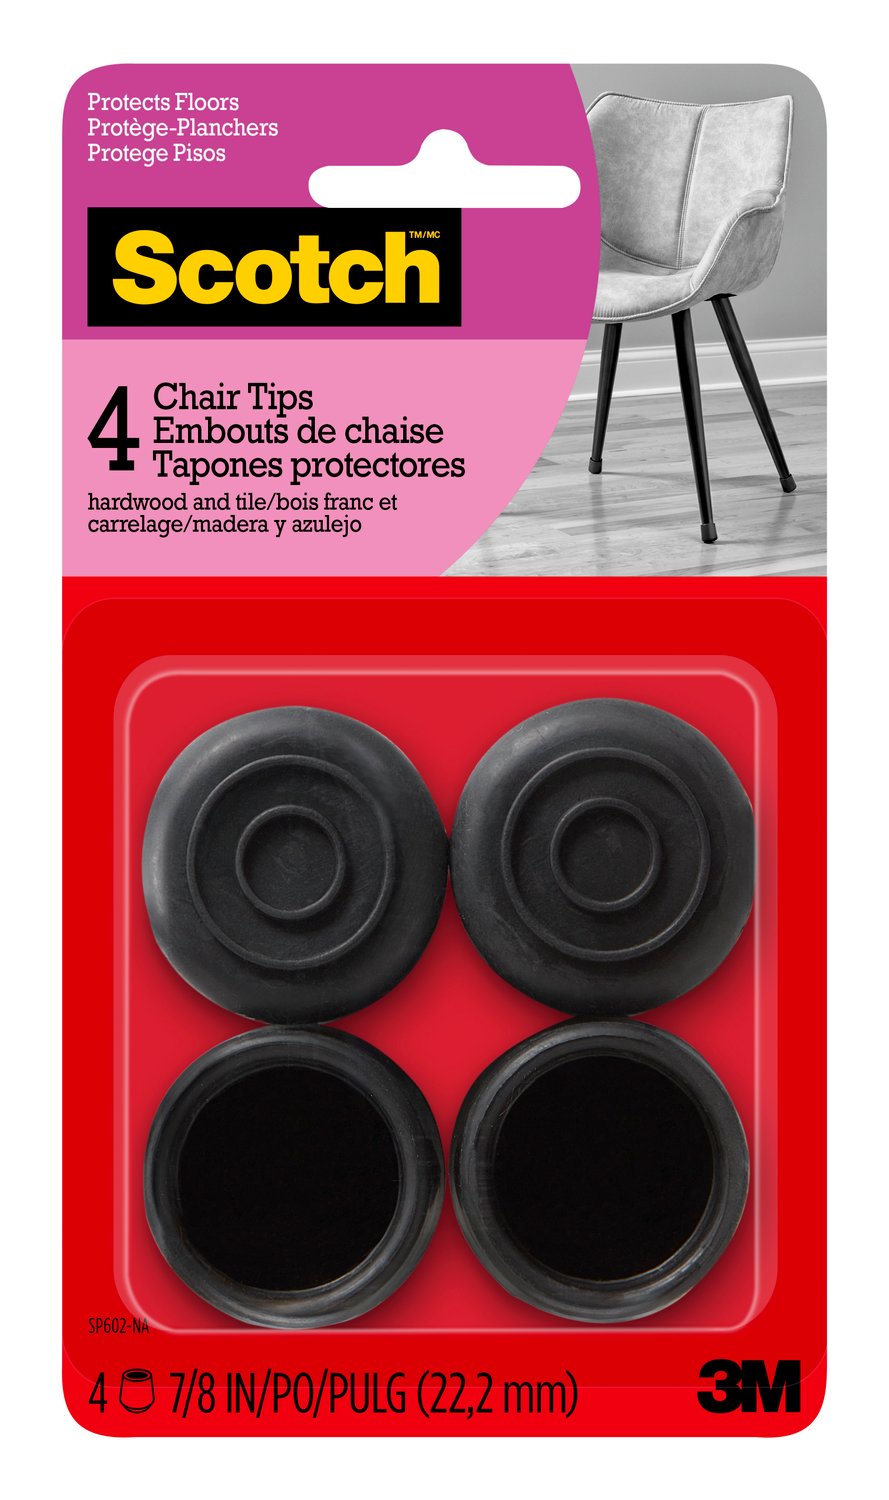 7100193956 - Scotch Chair Tips SP602-NA, Black Rubber 7/8-In 4/Pk